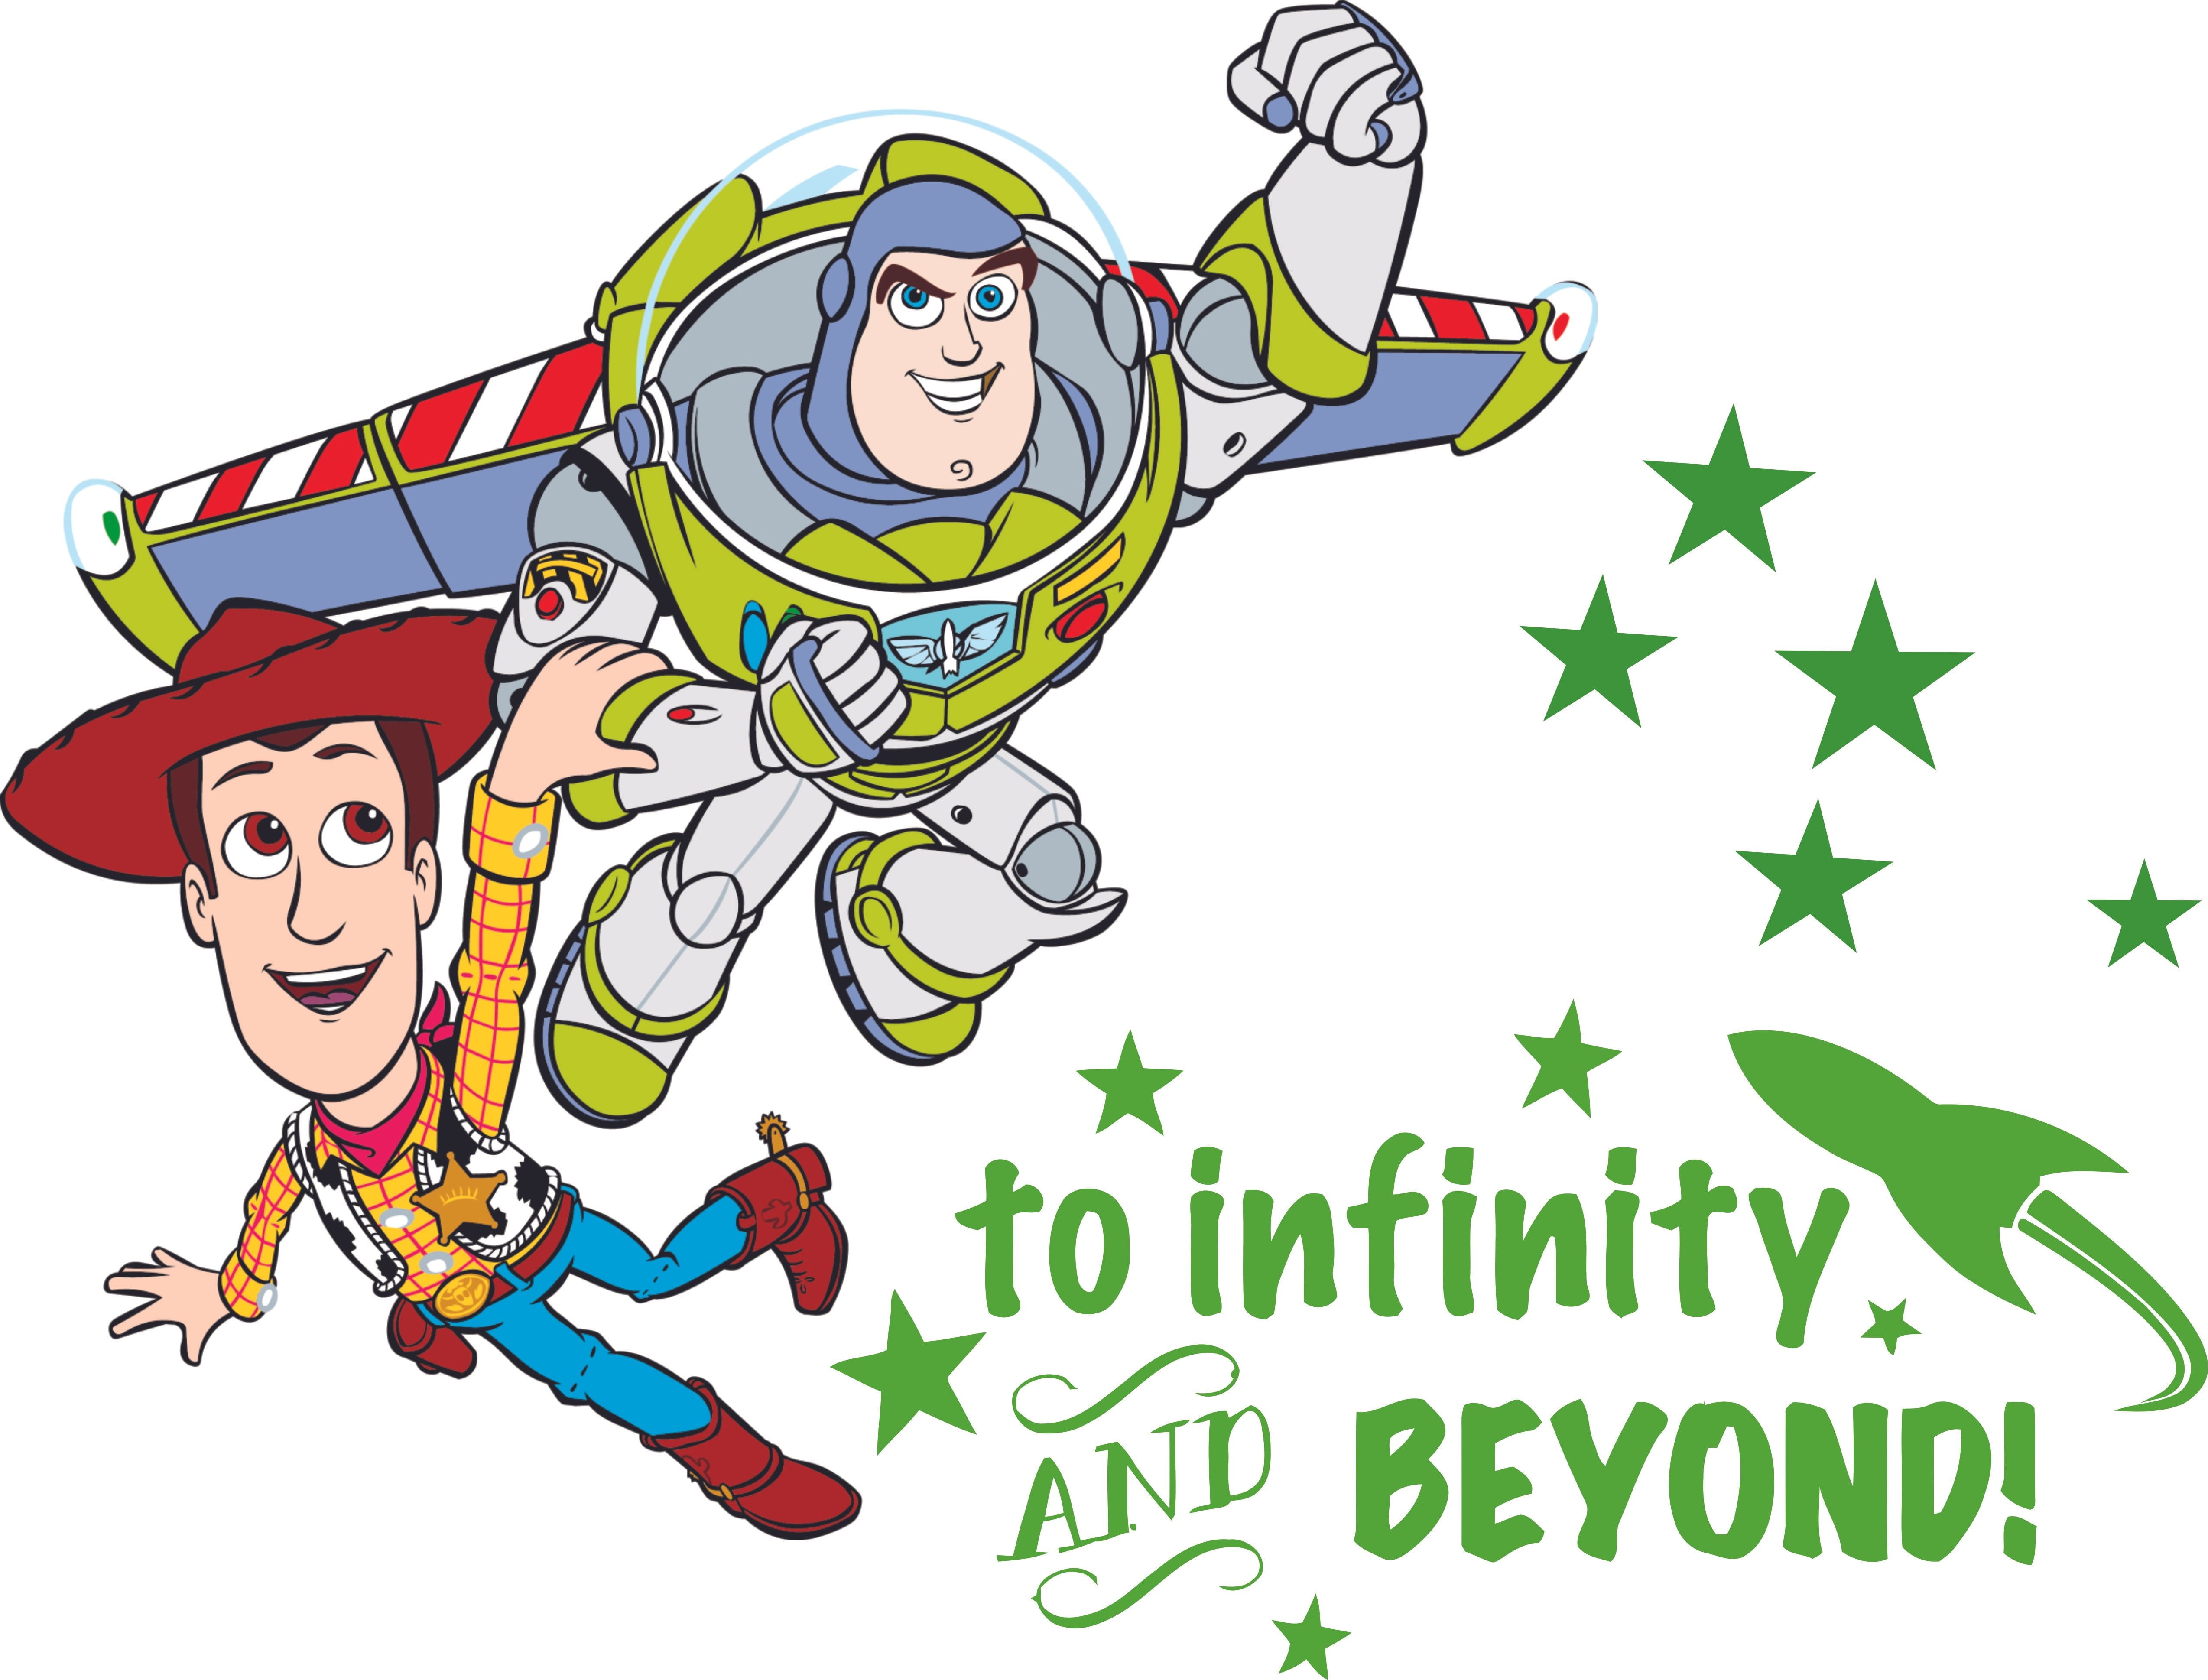 Toy Story Infinity Beyond Quote Cartoon Decors Wall Sticker Art Design ...